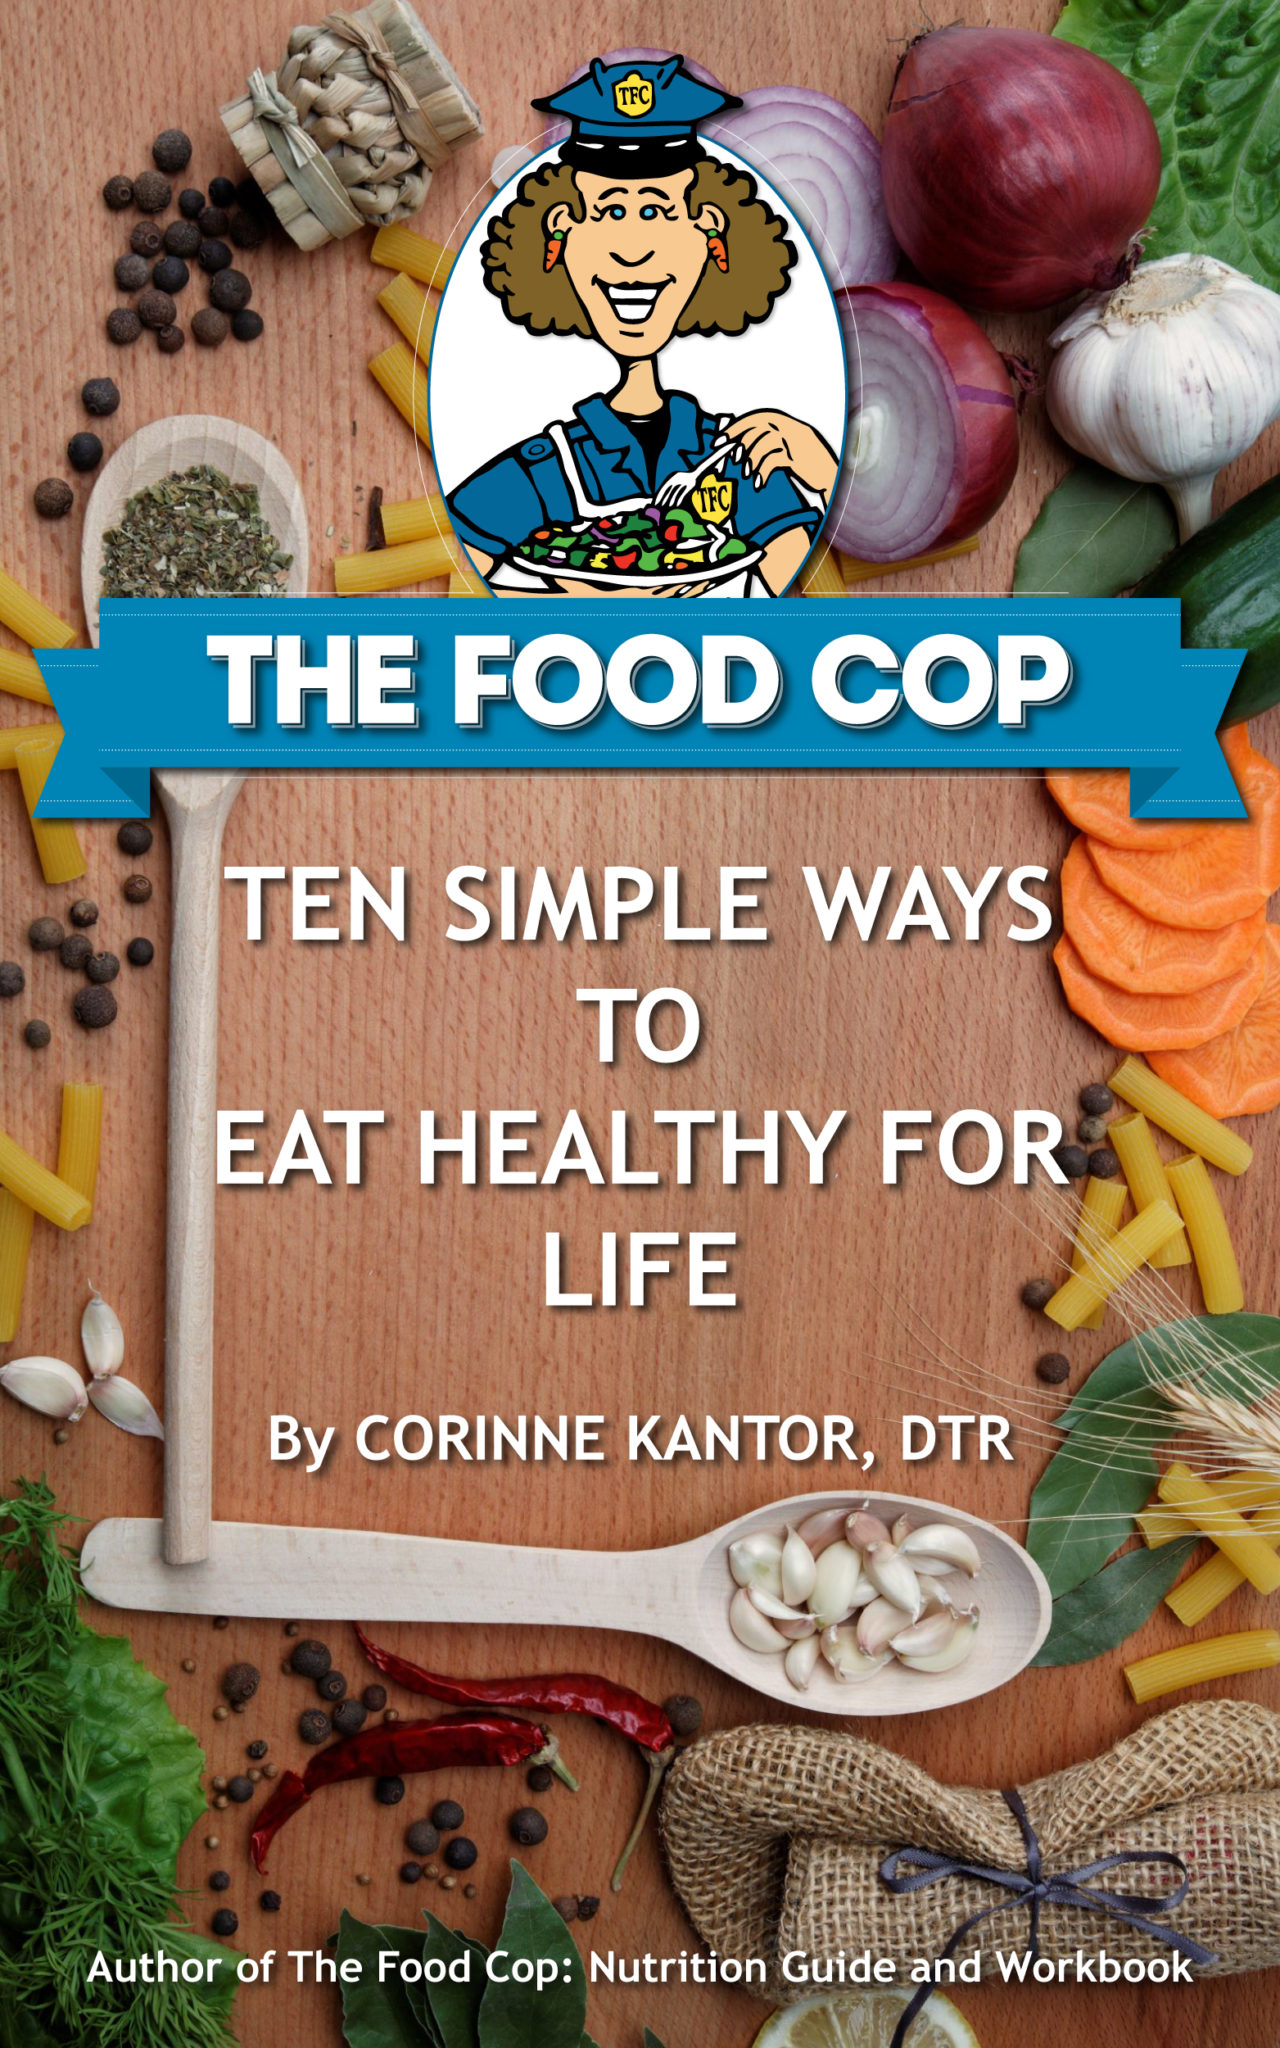 FREE: The Food Cop: Ten Simple Ways to Eat Healthy for Life by Corinne Kantor, DTR, CLT